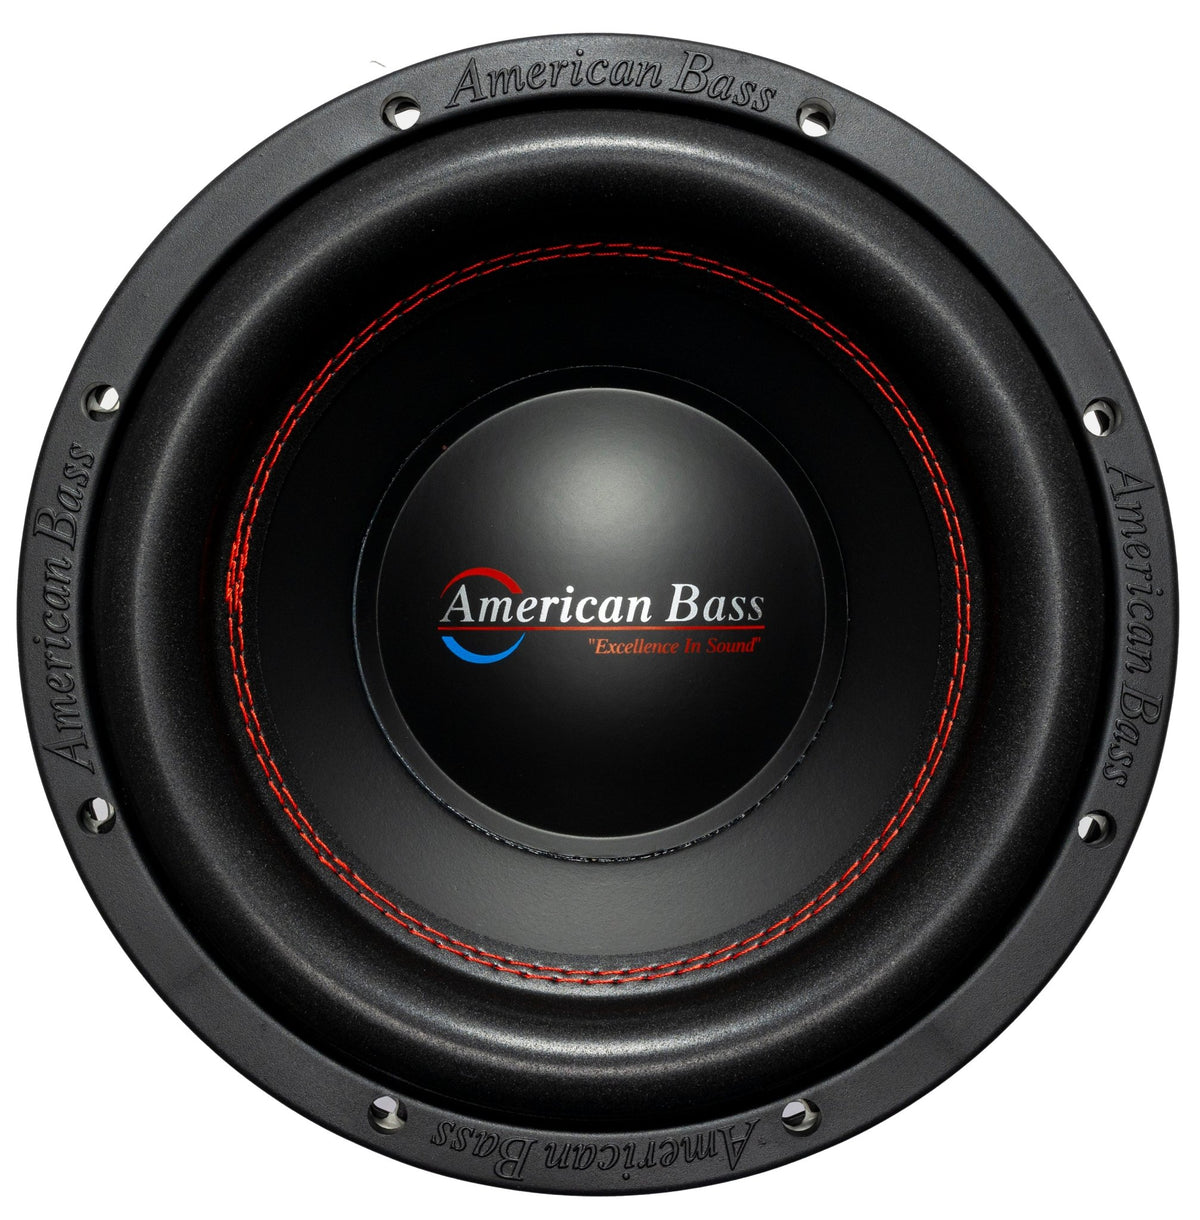 American Bass Subwoofers, Subwoofer Box